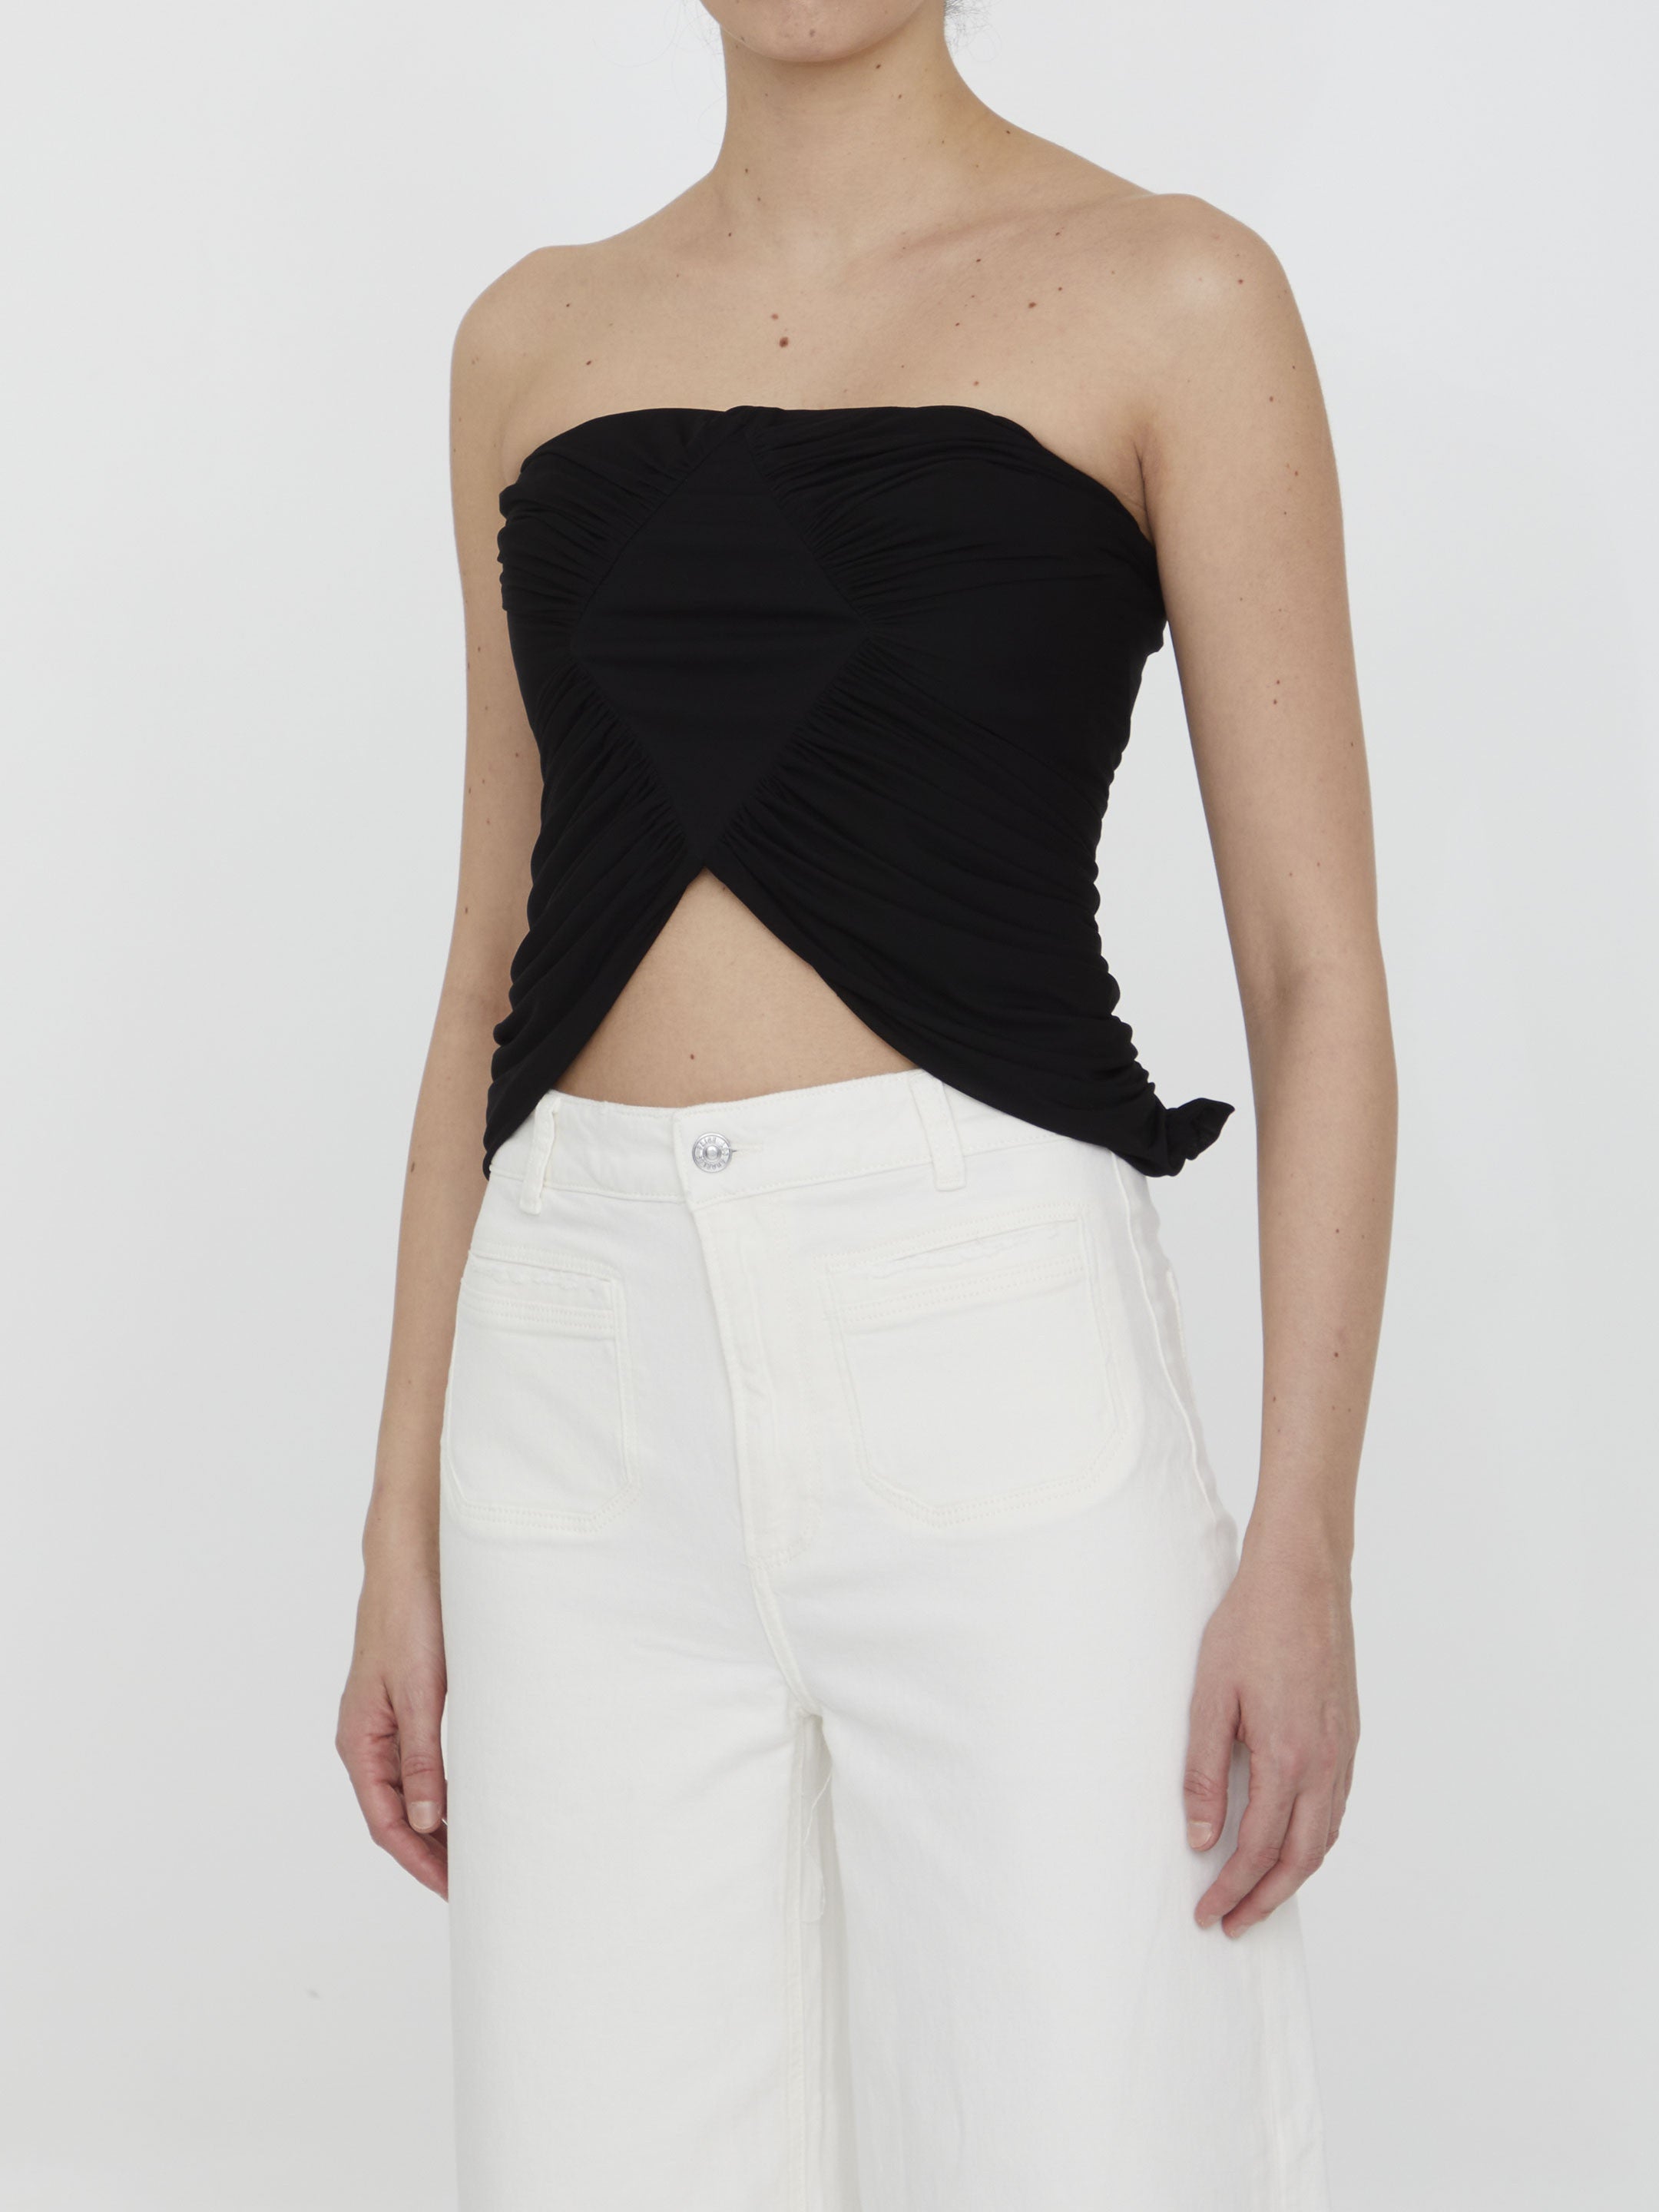 SAINT-LAURENT-OUTLET-SALE-Bustier-in-jersey-Shirts-38-BLACK-ARCHIVE-COLLECTION-2.jpg